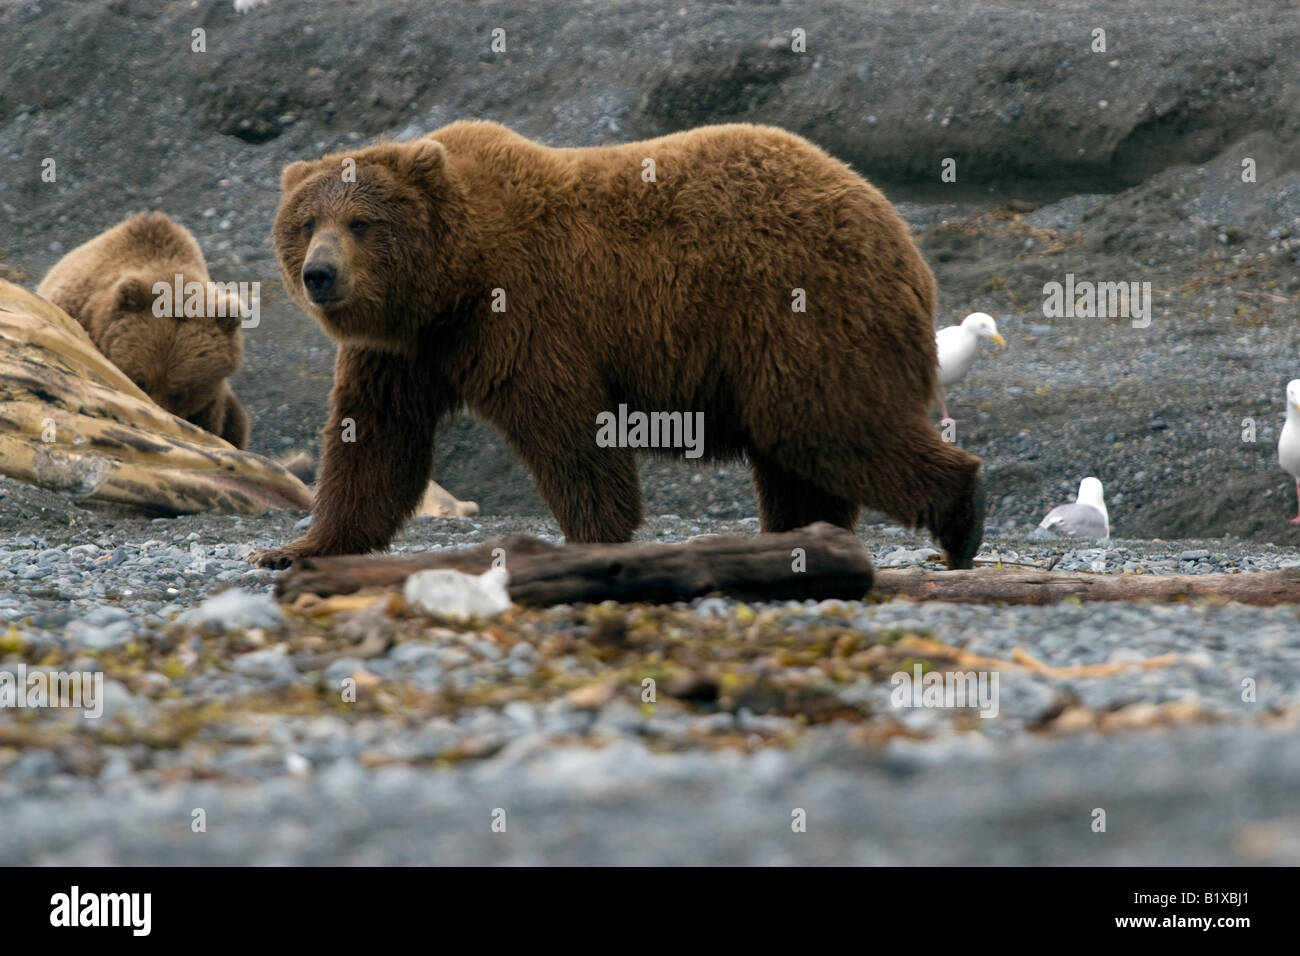 Coastal brown bear walking by the photographer on its way to a washed up whale carcass in Katmai National Park & Preserve, Alaska Stock Photo